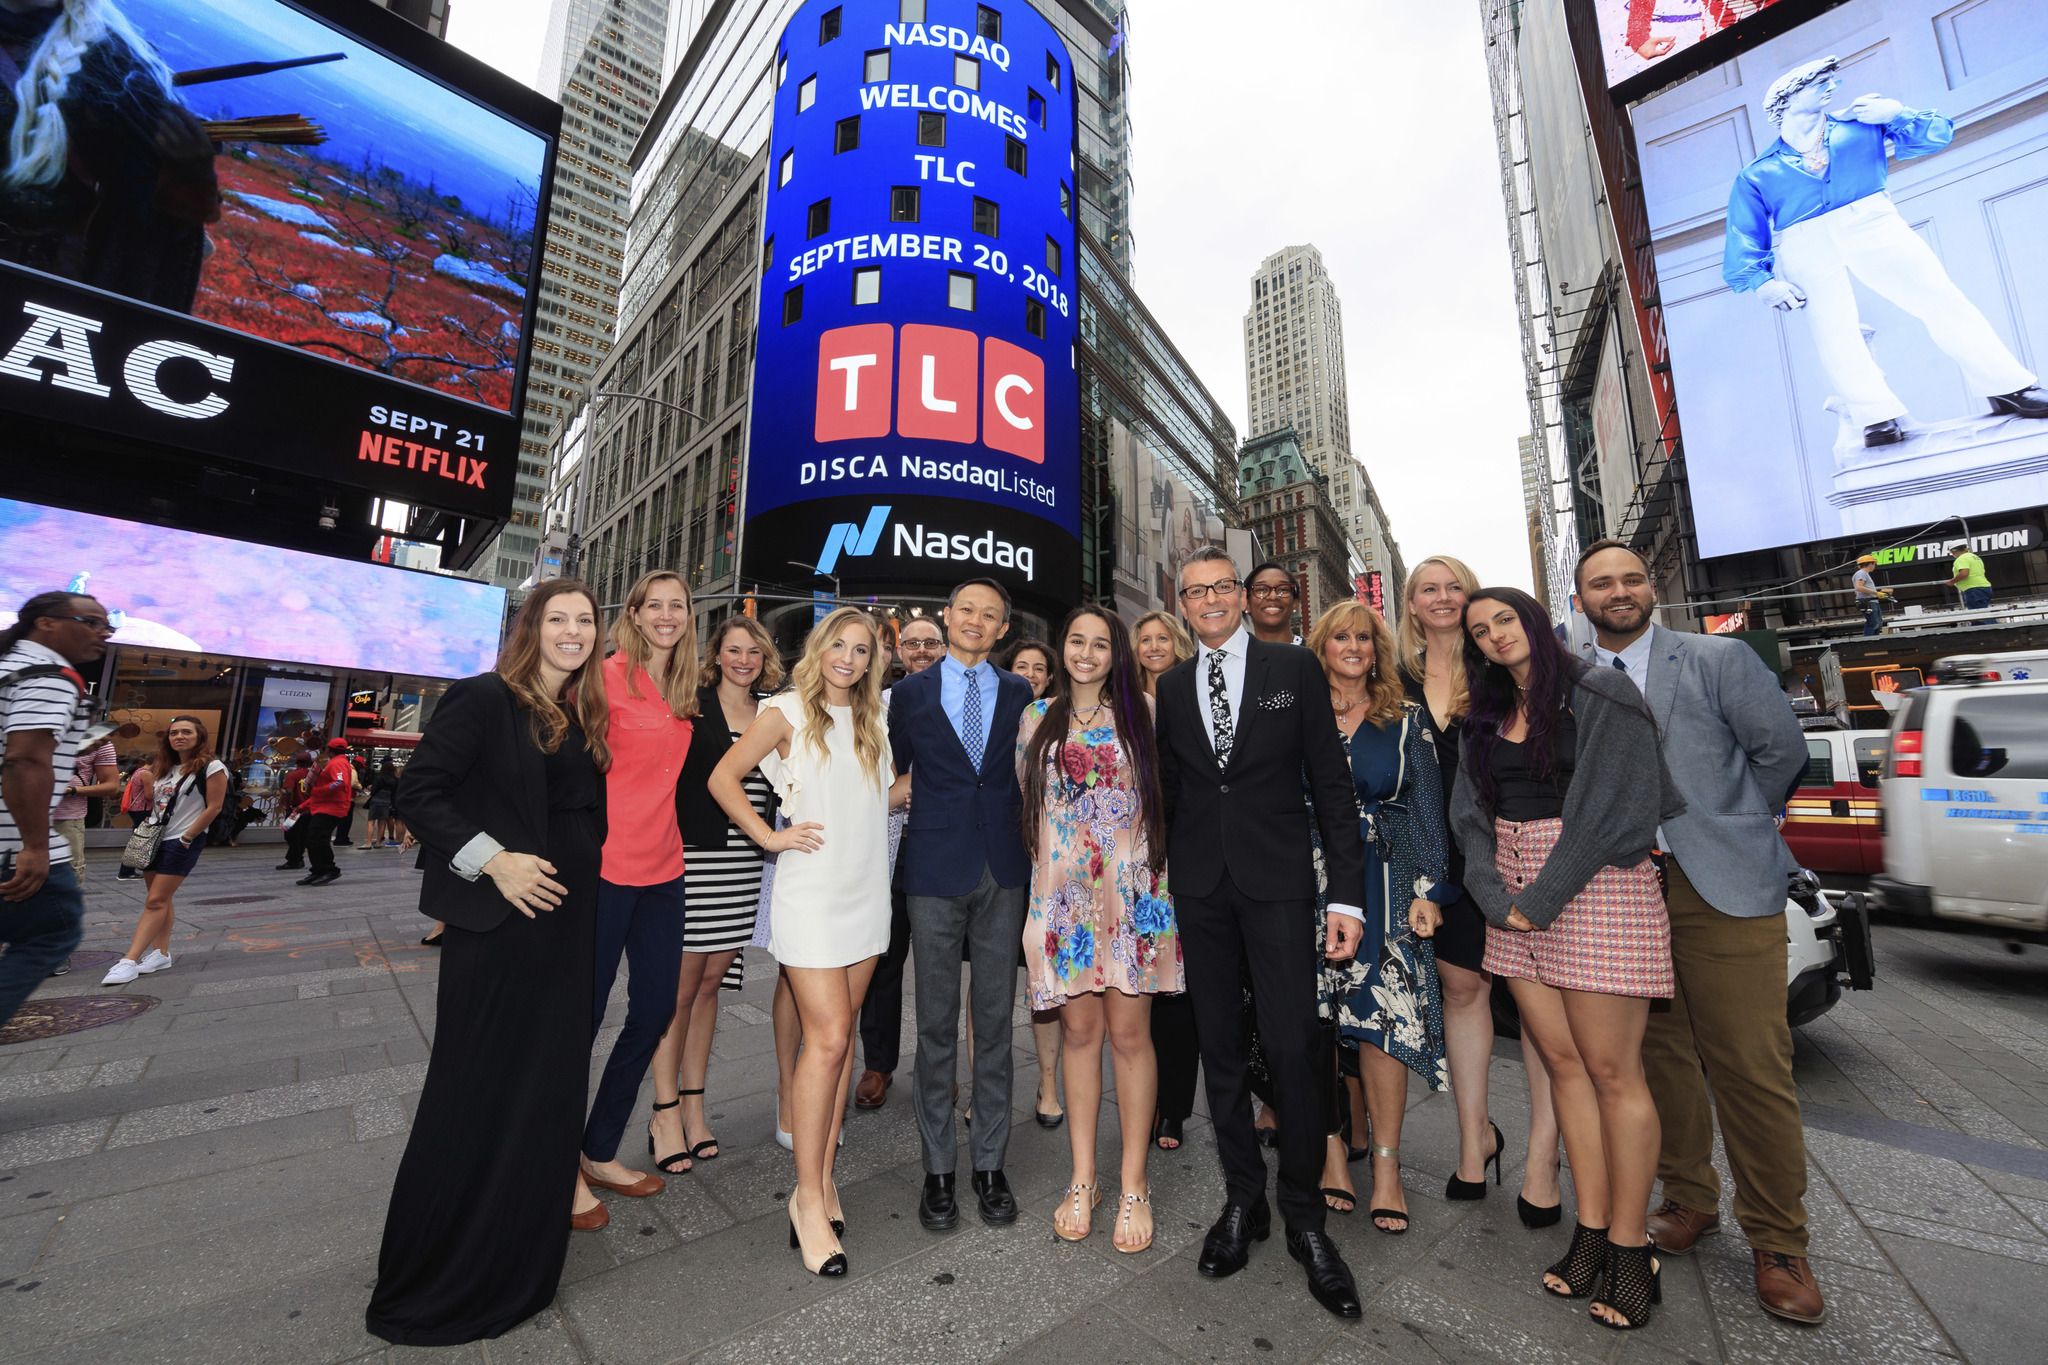 TLC in front Times square photo.jpg